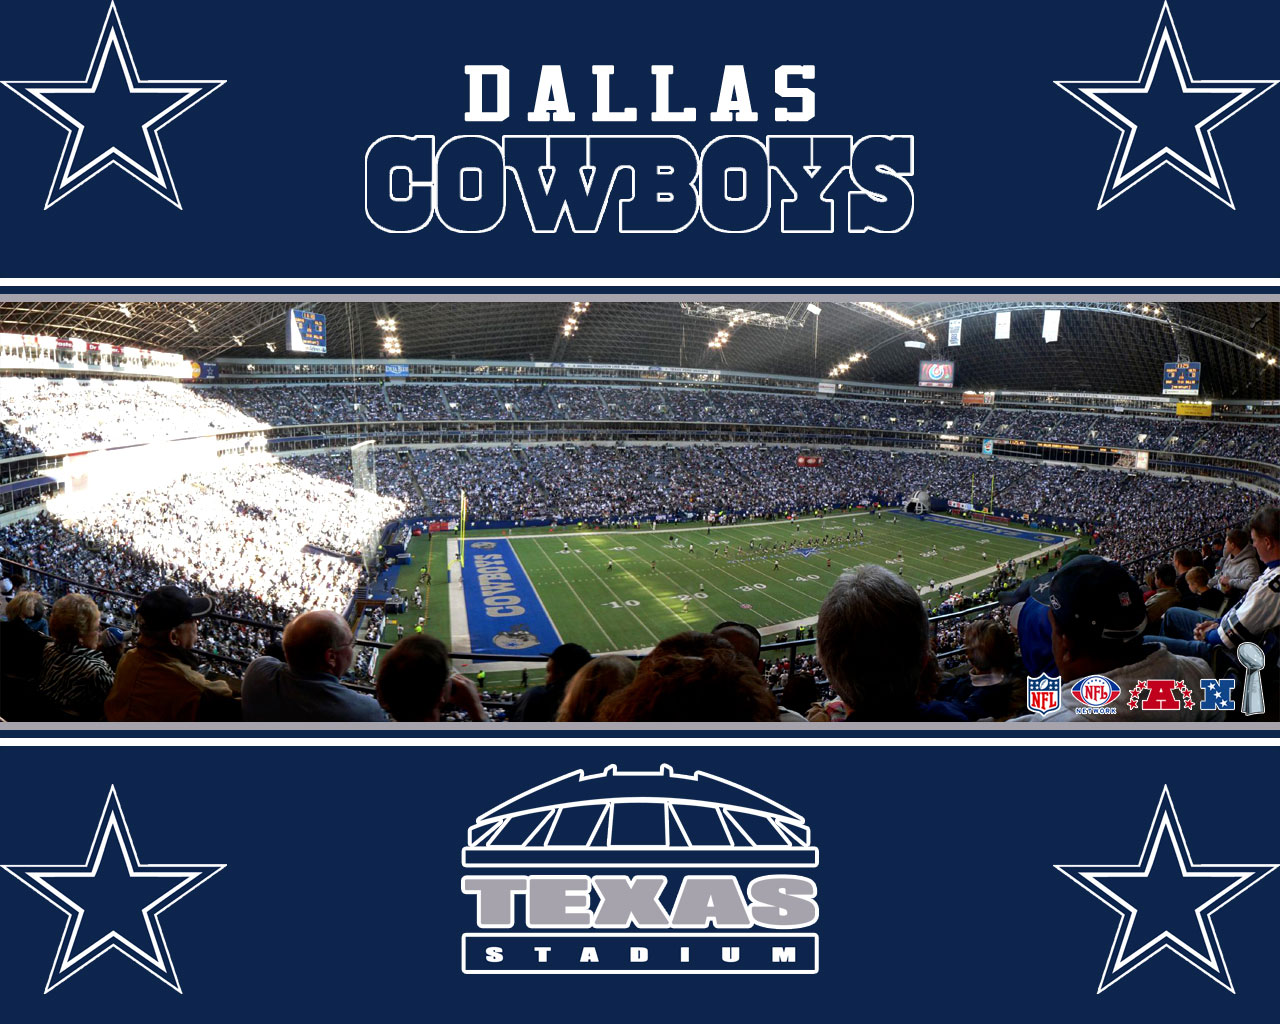 Best Dallas Cowboys Desktop Wallpaper You Will Find On The Inter